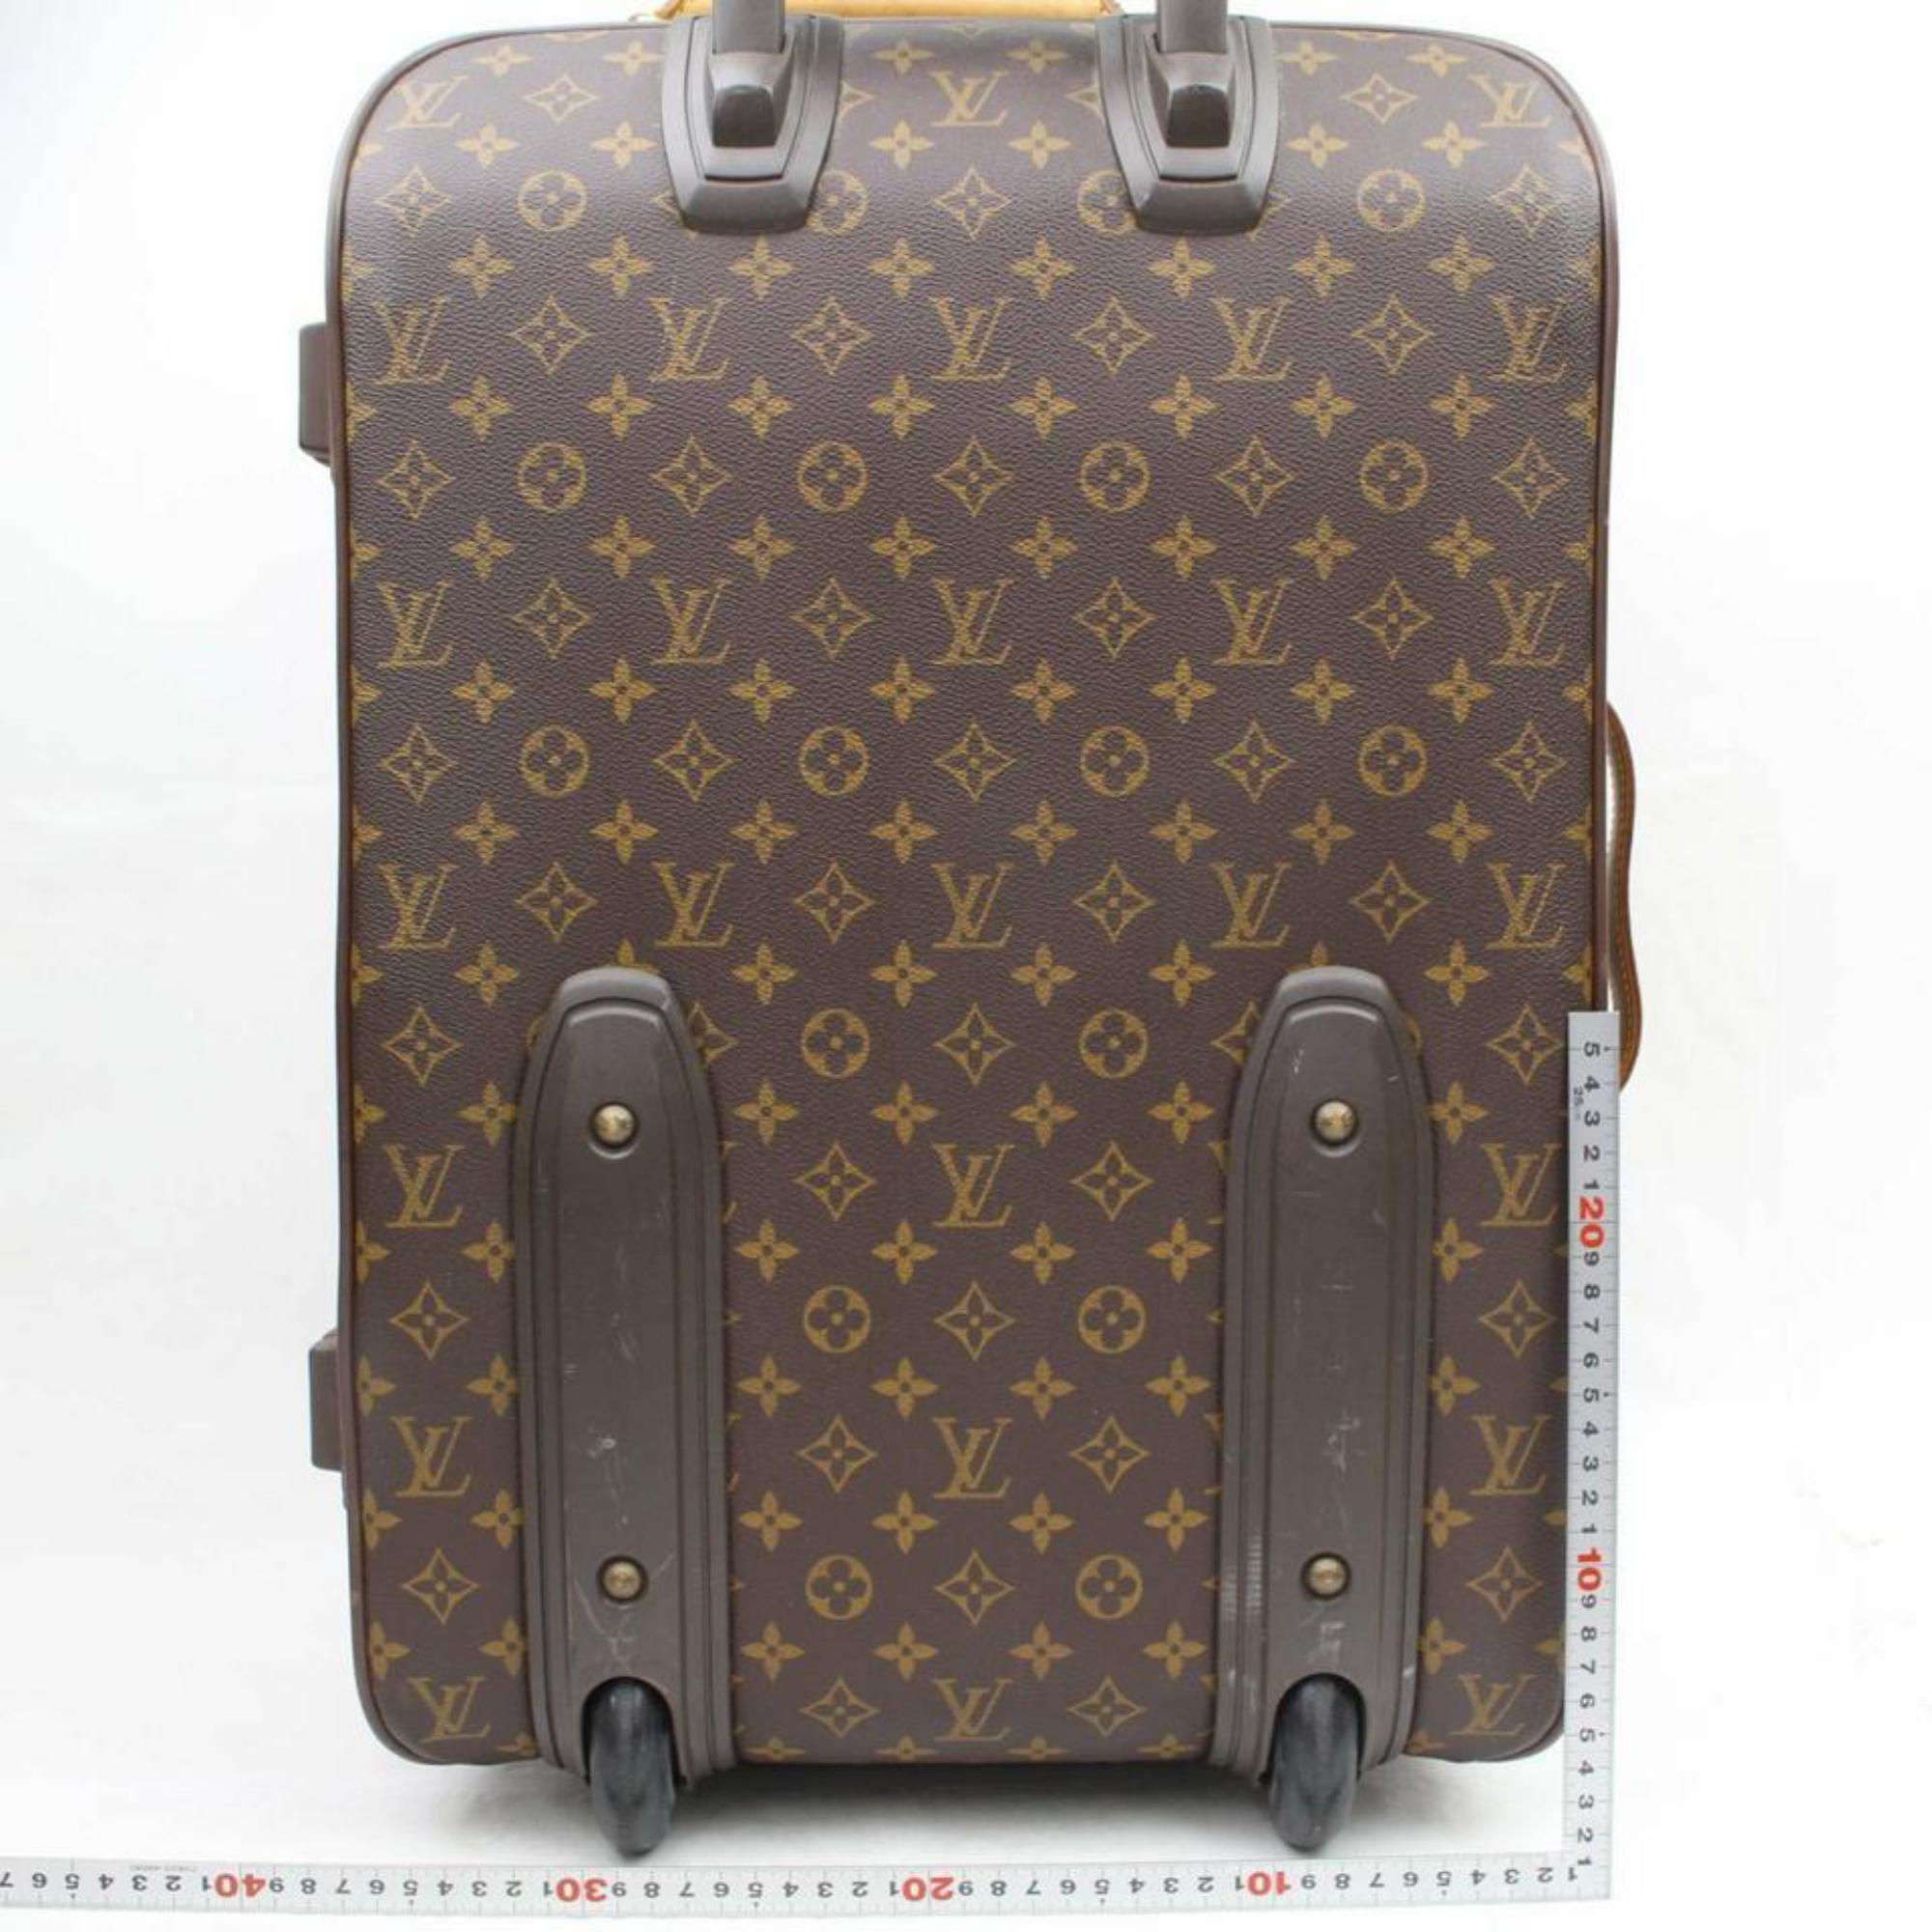 Gray Louis Vuitton Legere 55 Rolling Luggage Carry-on Suitcase 870081 Travel Bag For Sale